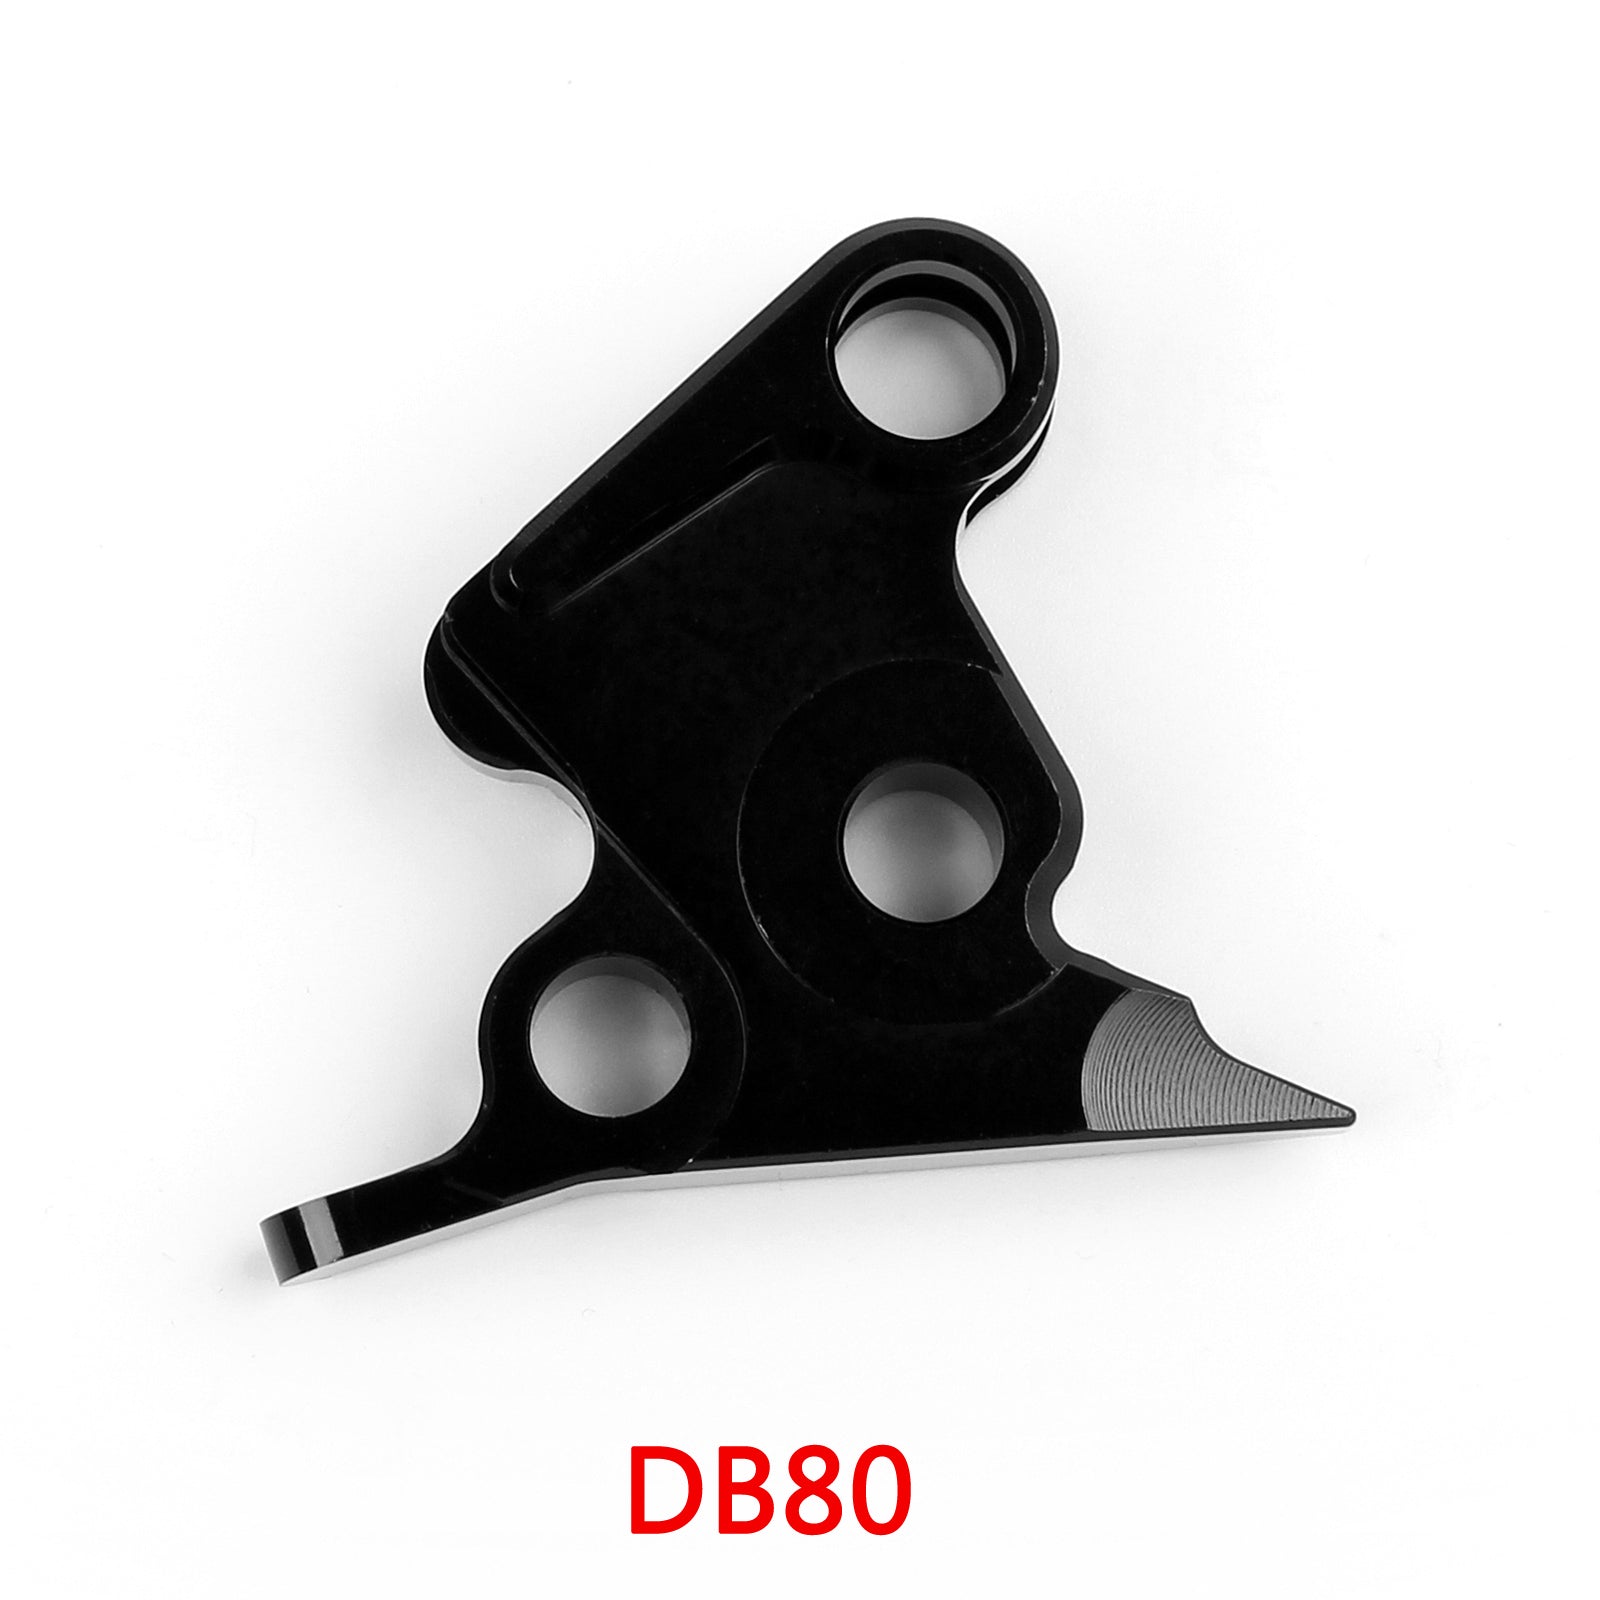 CNC Short Clutch Brake Lever fit for Ducati 996/998/B/S/R M900/M1000 MTS1100